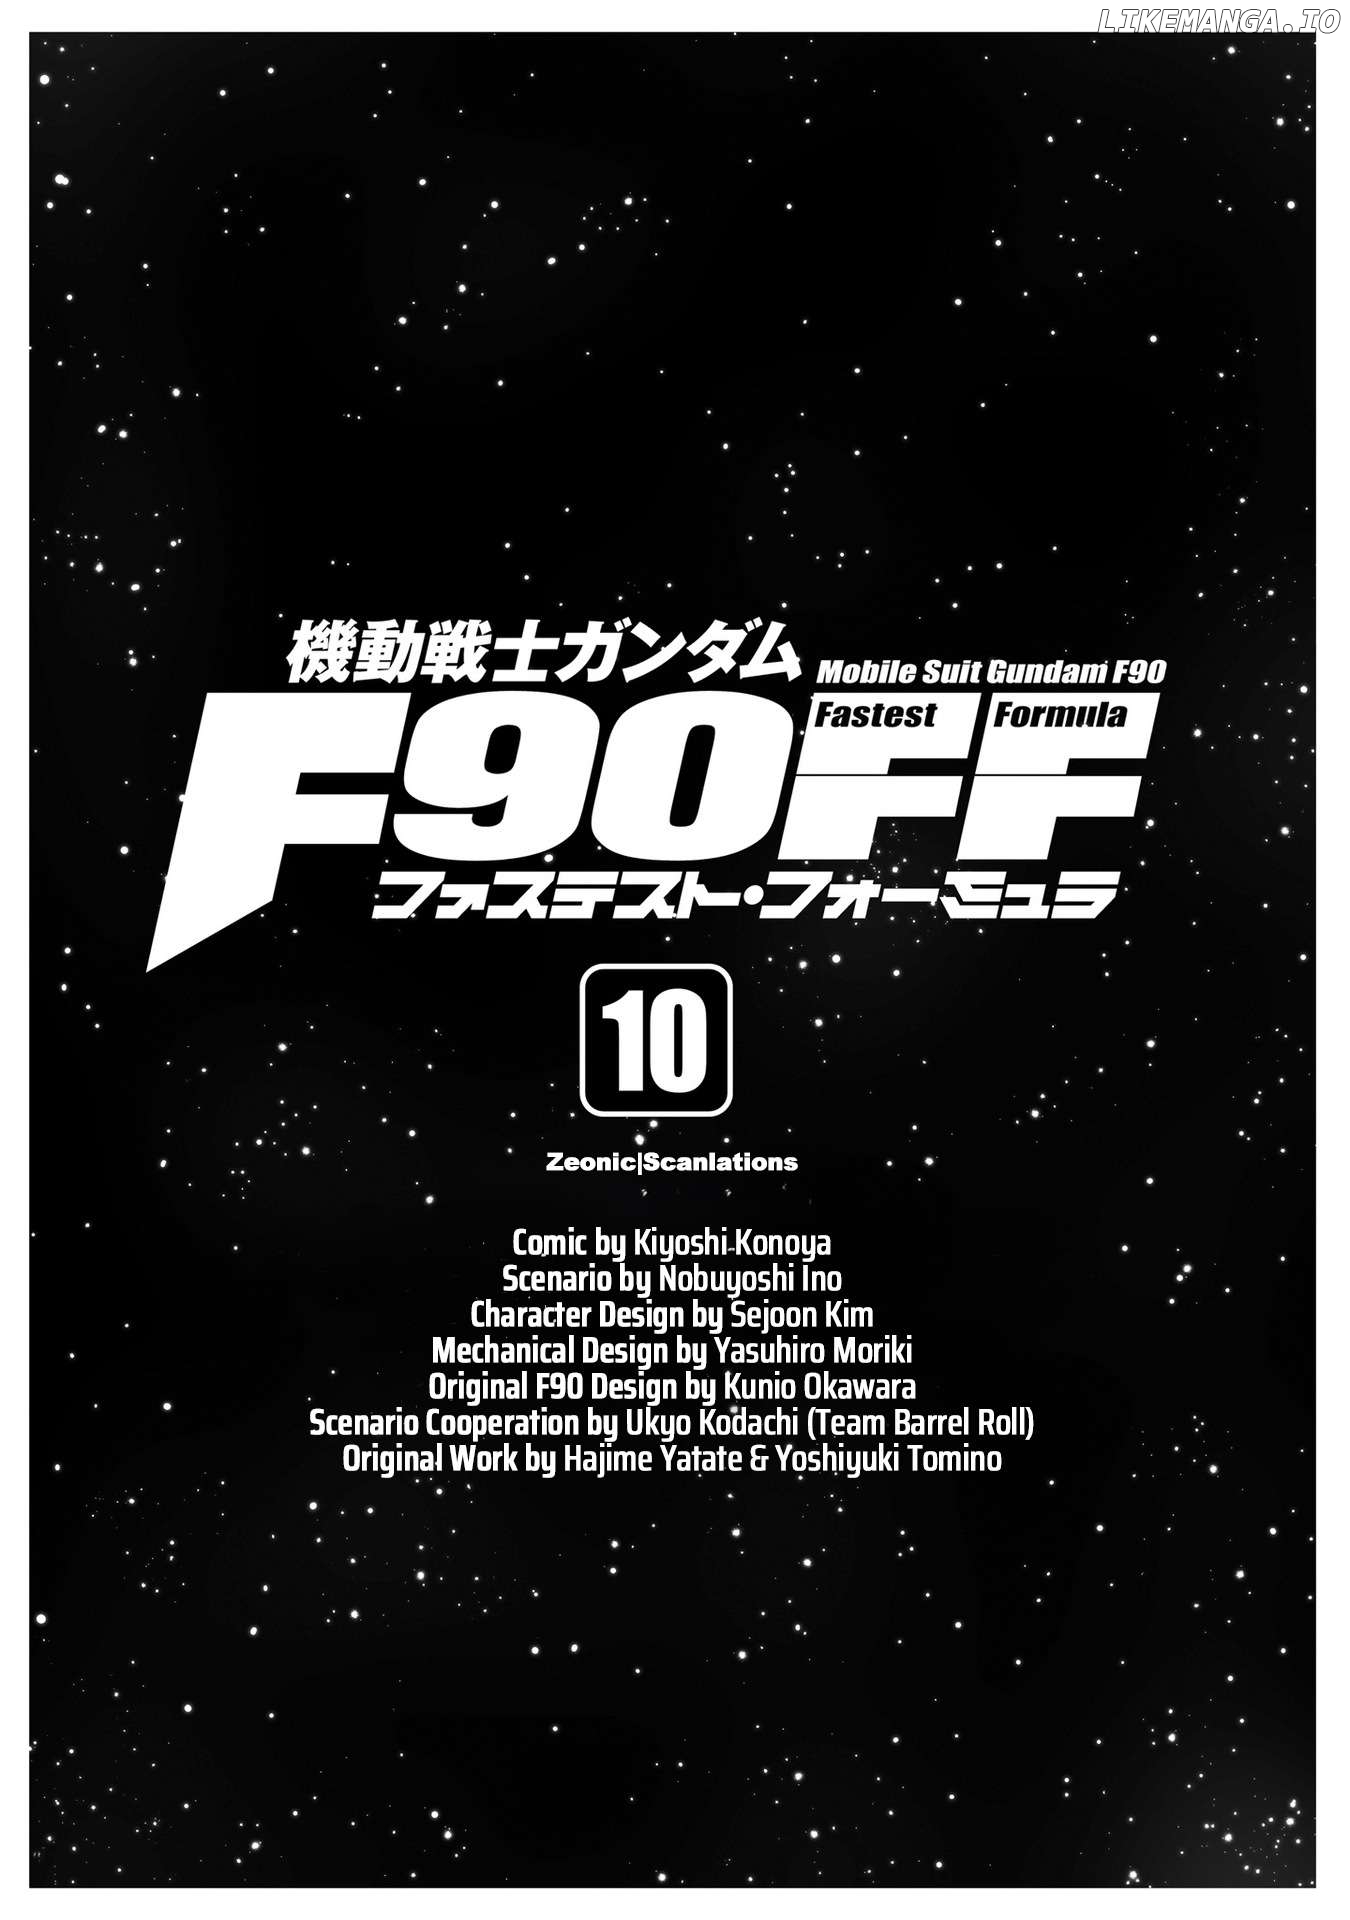 Mobile Suit Gundam F90 FF Chapter 38 - page 2